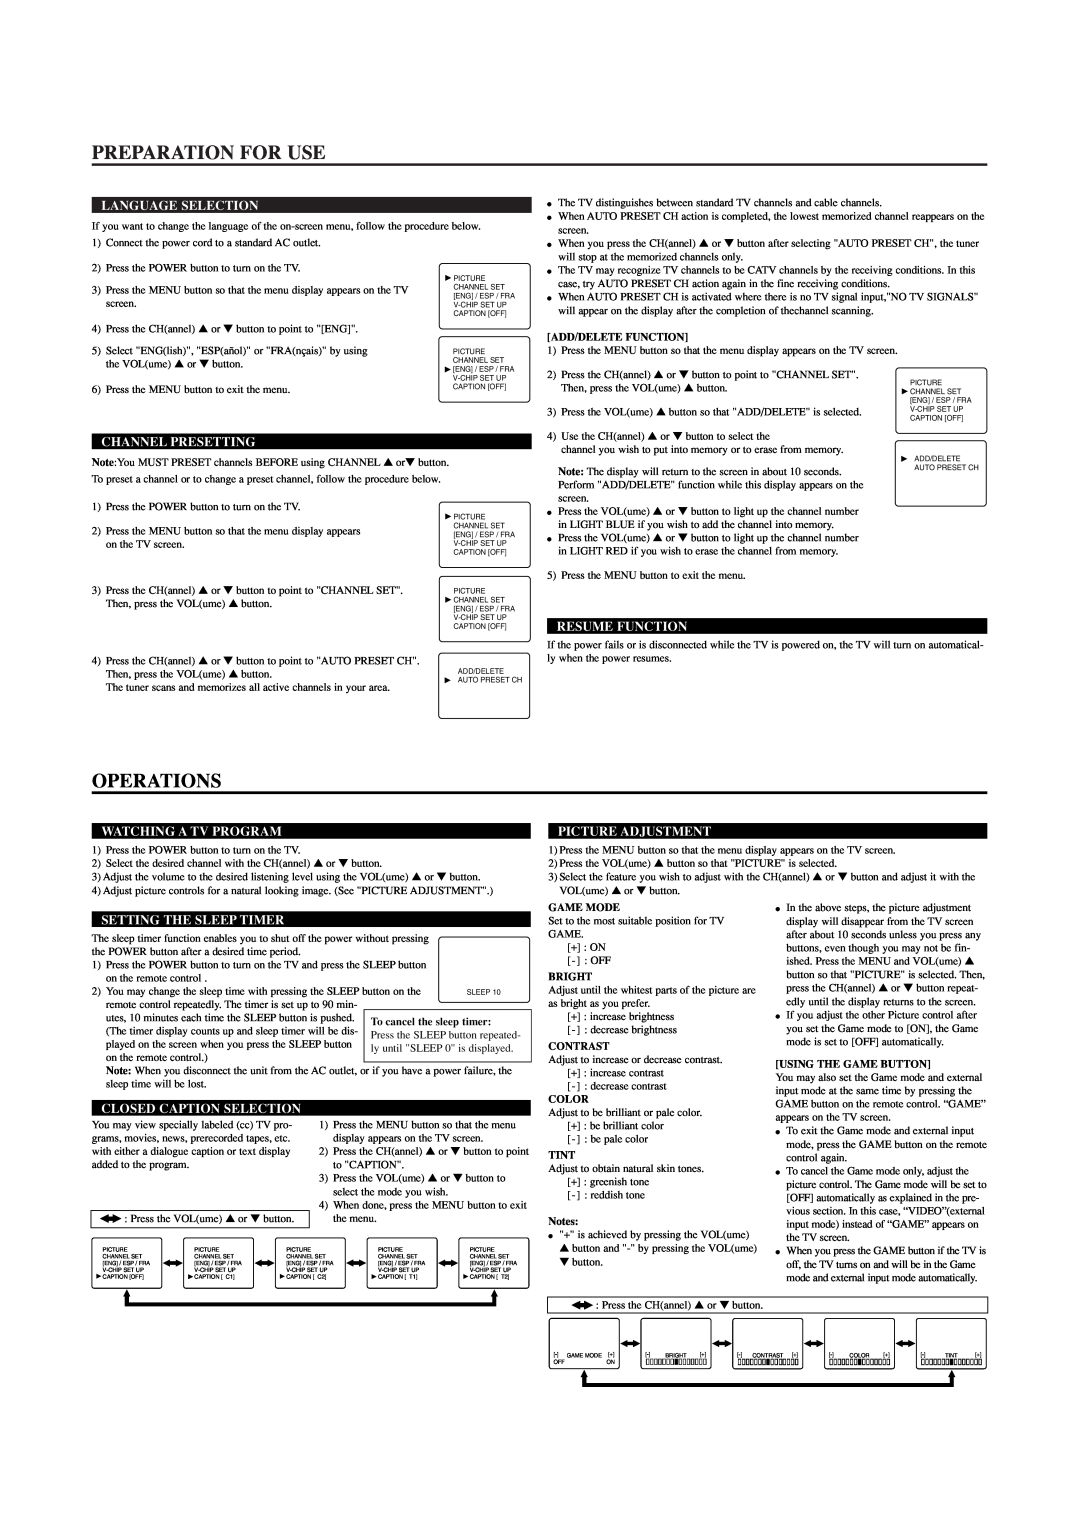 Sylvania C6413TE, C5419TE Preparation For Use, Operations, Language Selection, Channel Presetting, Resume Function, Bright 